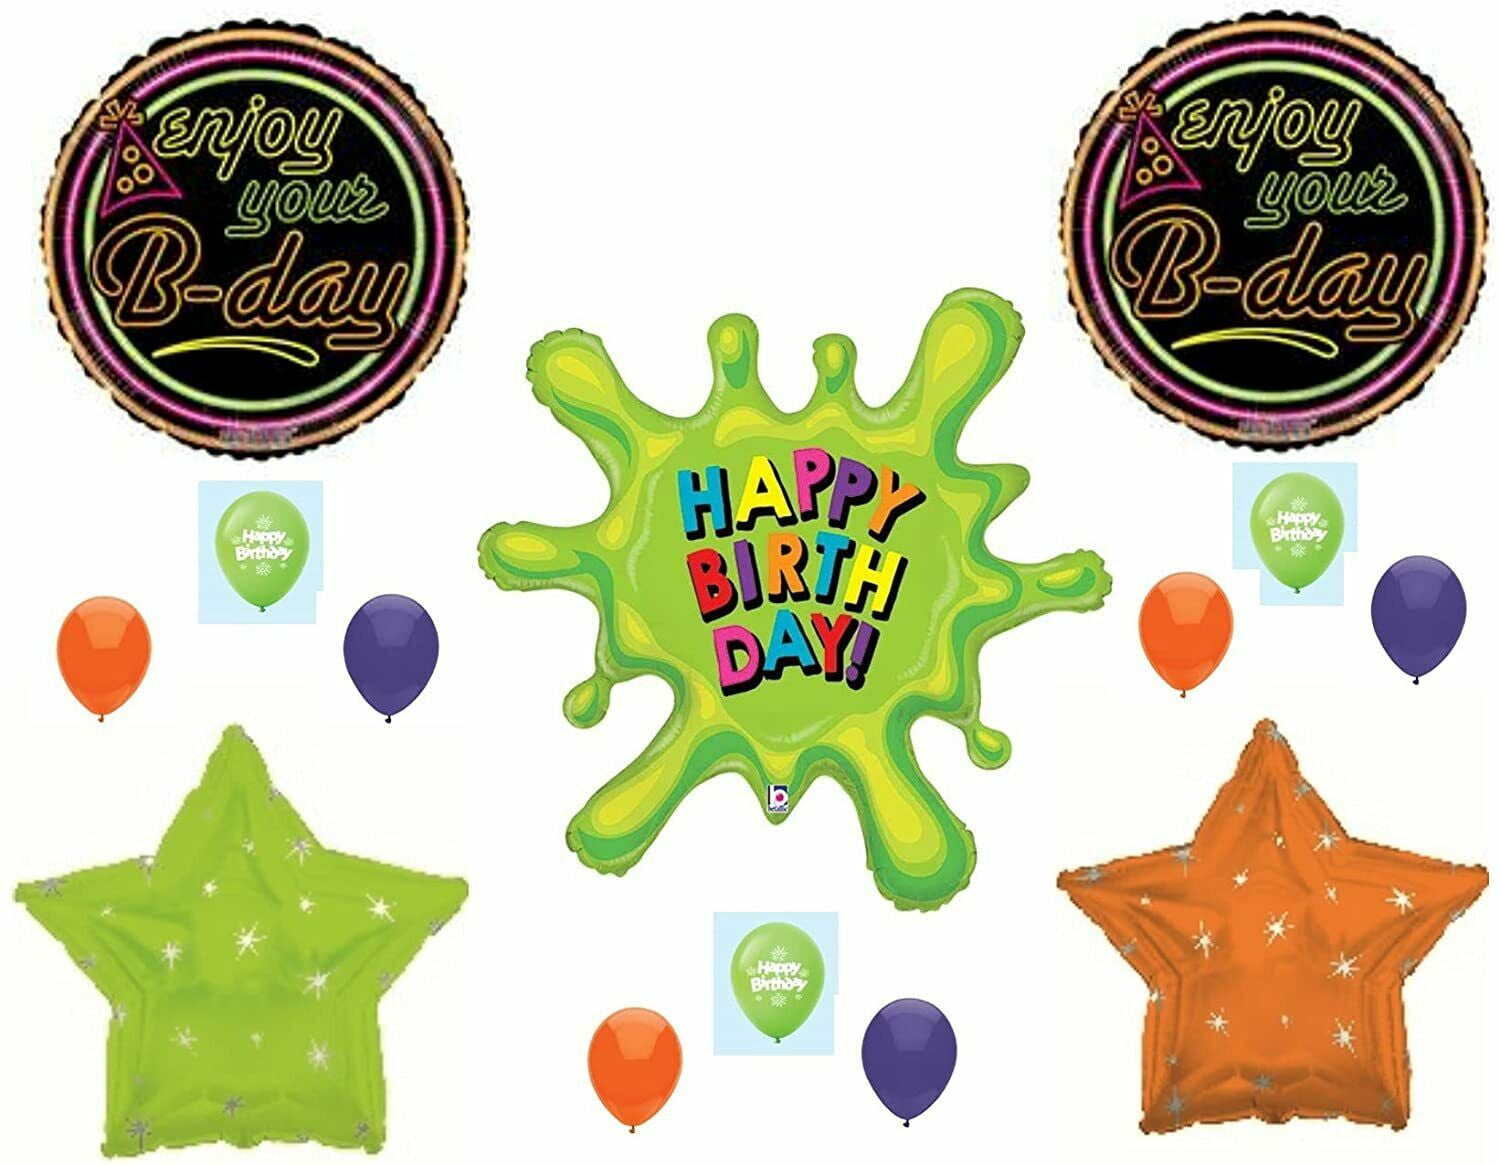 Slime Happy Birthday Banner Slime Painting Banner Pennant for Slime Birthday Party Art Theme Baby Shower Slime Party Decorations Art Party Supplies